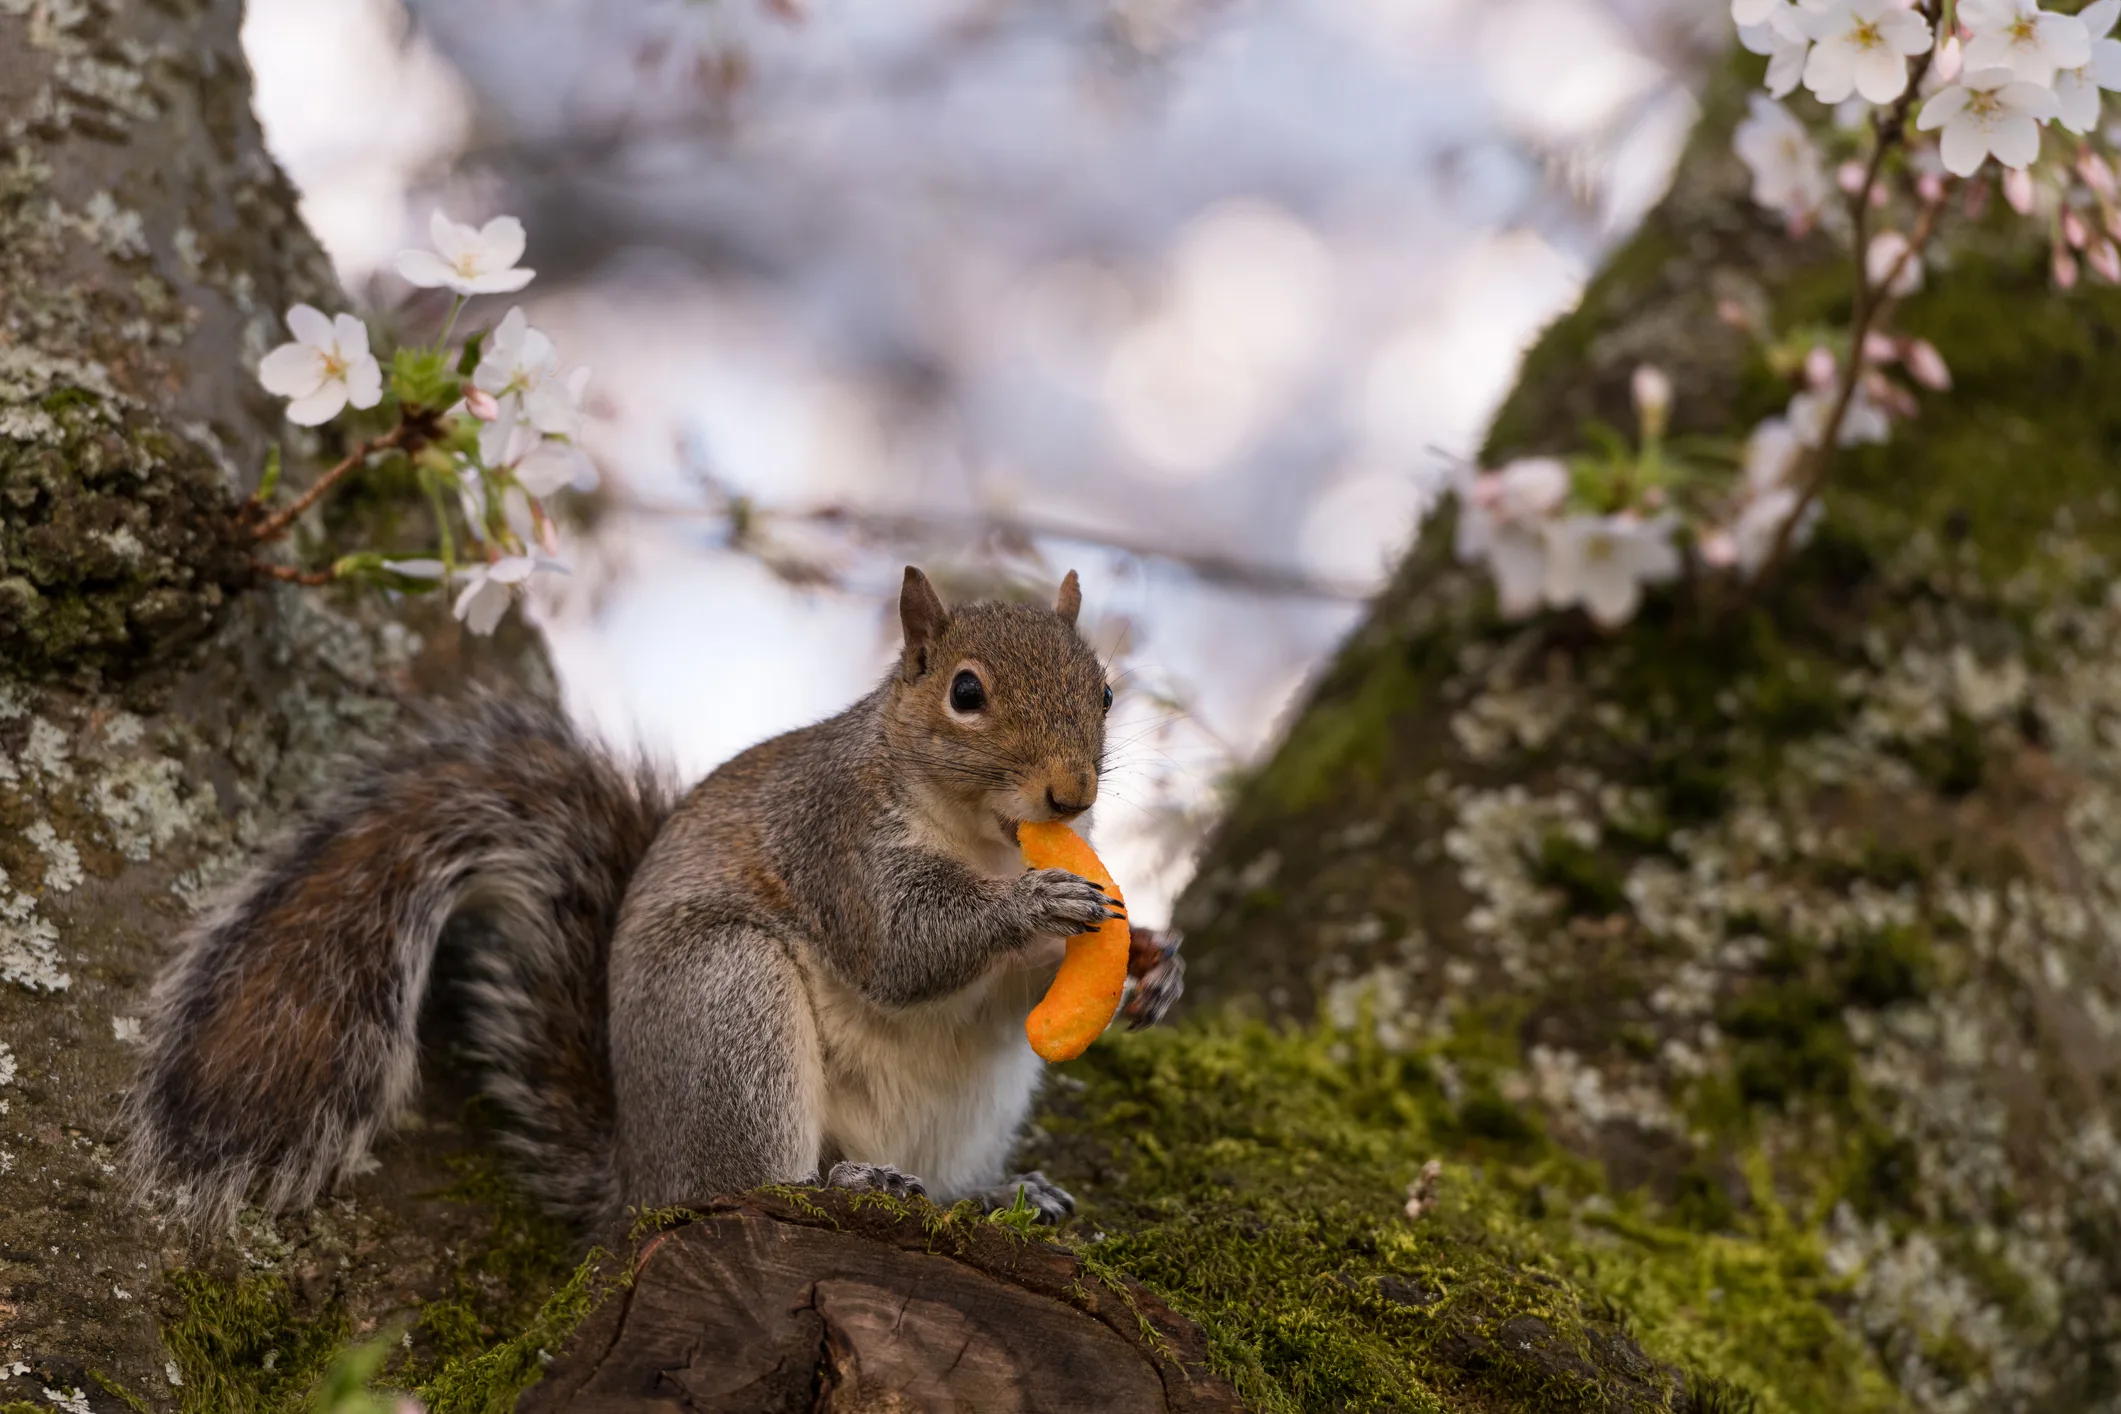 A squirrel eats a cheese puff on a cherry blossom tree